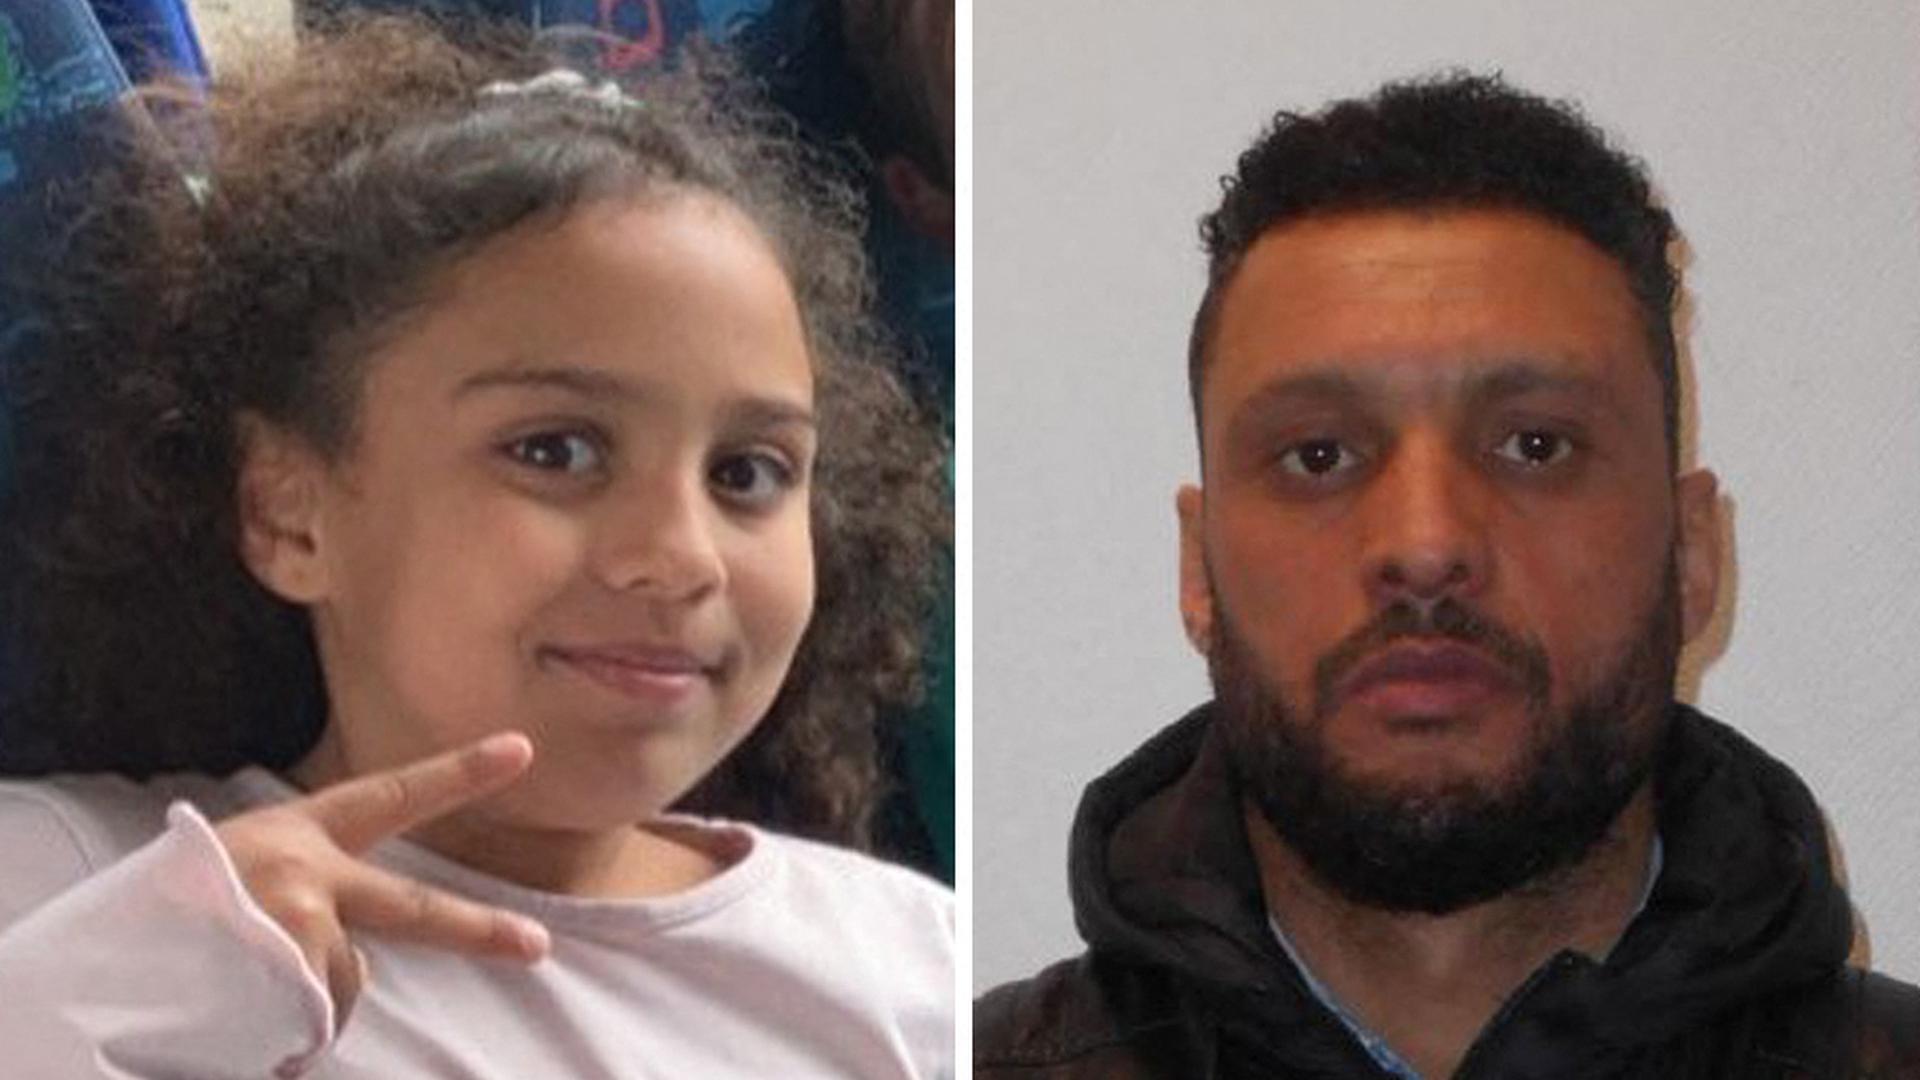 This combination made on June 08, 2023 shows two handout pictures released by the Direction Centrale de la Police Judiciaire, one of 8-year old Malek Younes (L) who went missing in Dunkirk, northern France, during the night of 6 to 7 June 2023, the other of Jamel Younes, 40, father of Malek and main suspect according to the police. (Photo by Direction Centrale de la Police Judiciaire / AFP) / RESTRICTED TO EDITORIAL USE - MANDATORY CREDIT "AFP PHOTO / Direction Centrale de la Police Judiciaire" - NO MARKETING NO ADVERTISING CAMPAIGNS - DISTRIBUTED AS A SERVICE TO CLIENTS